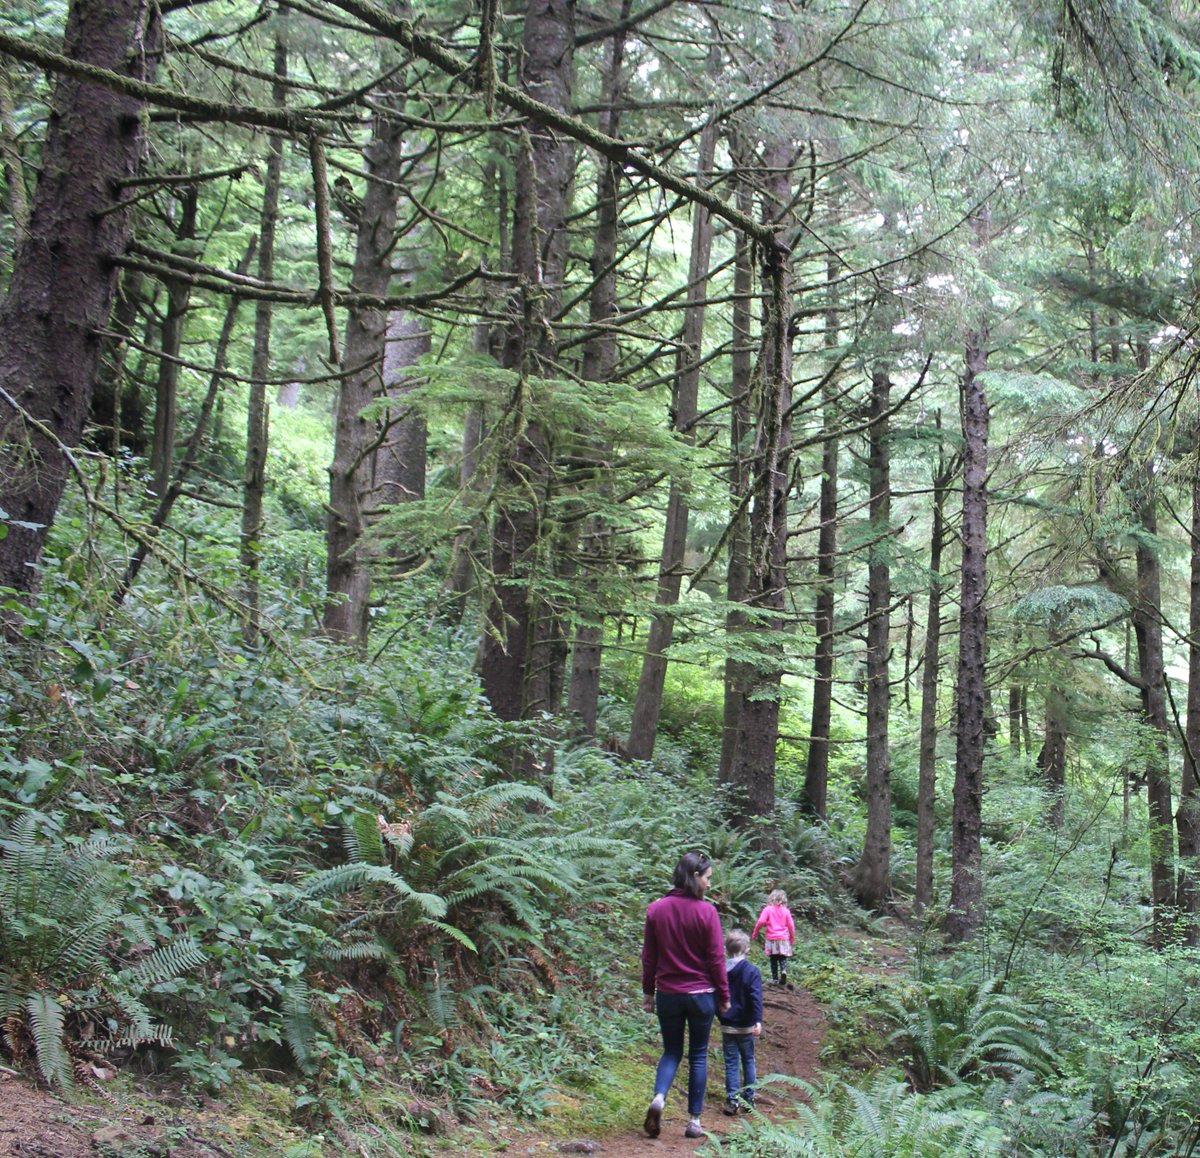 Throwback to Kim's trip to Oregon.  She is used to the Rocky Mountain so it was cool to see the PNW.
@Krzanderson
#TBT #Travel #KidsWhoTravel #Vacation #Hike #Hiking #Trails #Forest #PNW #FamilyTime #Oregon #OregonCoast #WomenWhoHike #KidsWhoHike #FamiliesWhoHike #Explore #Outly